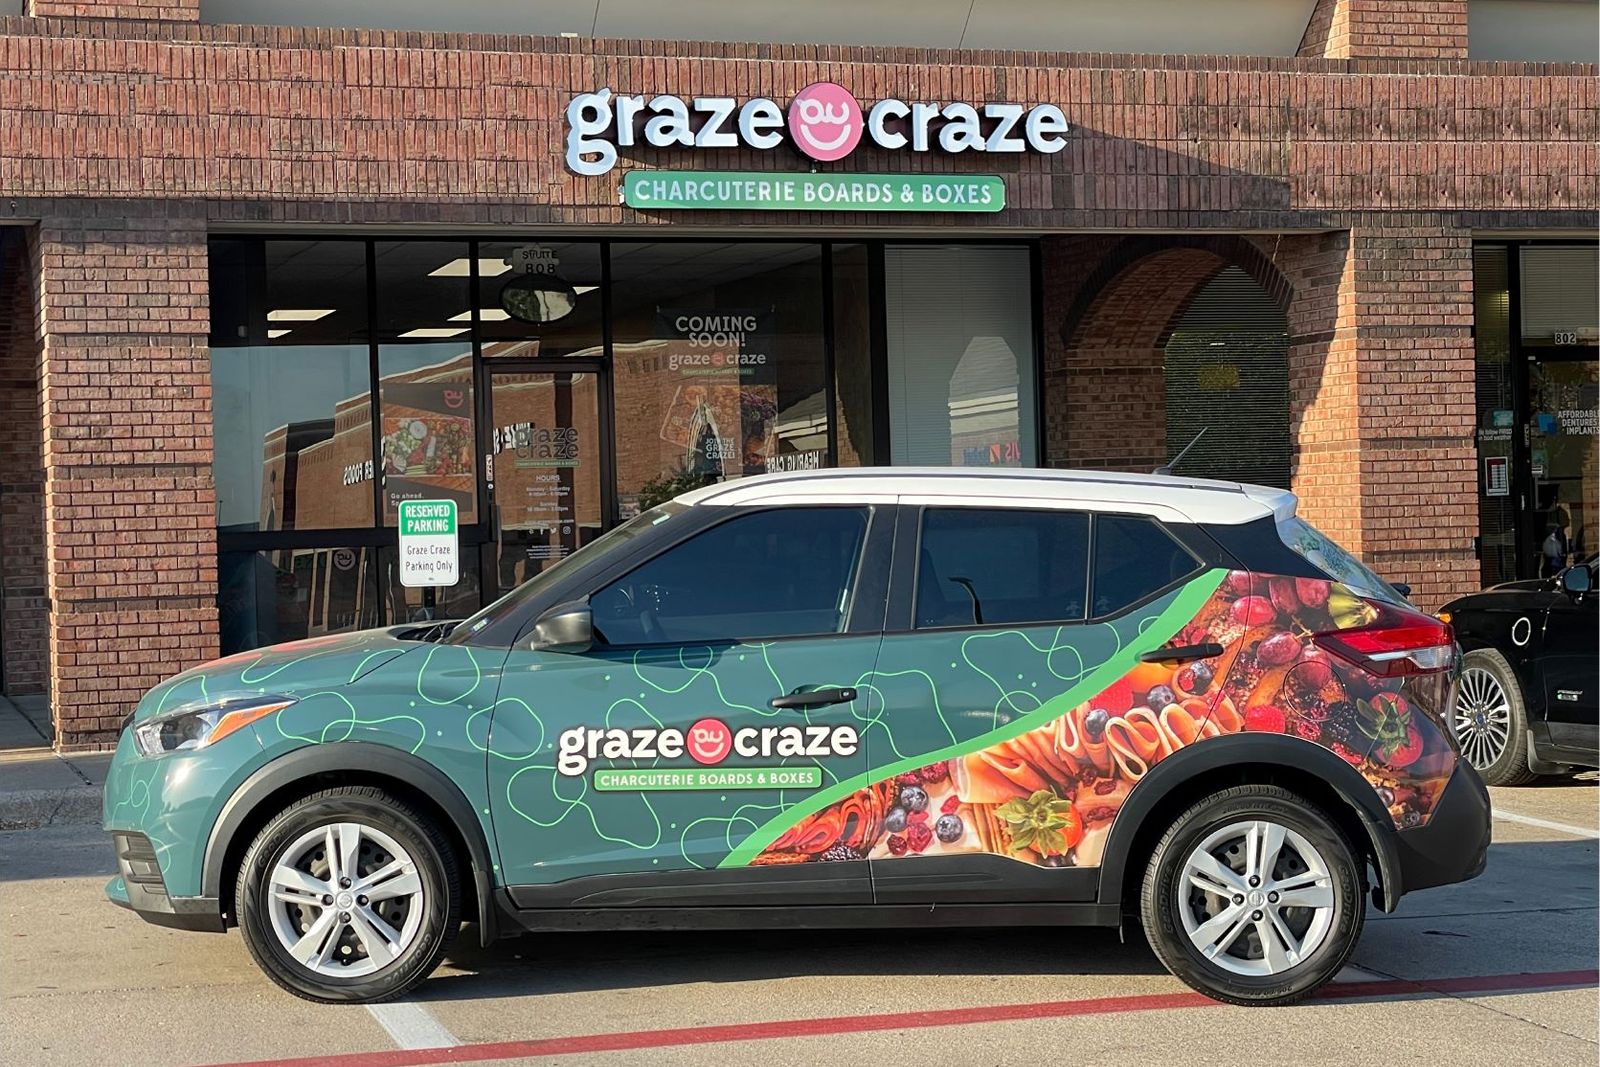 New Charcuterie Concept Graze Craze to Open in Fort Worth, Texas